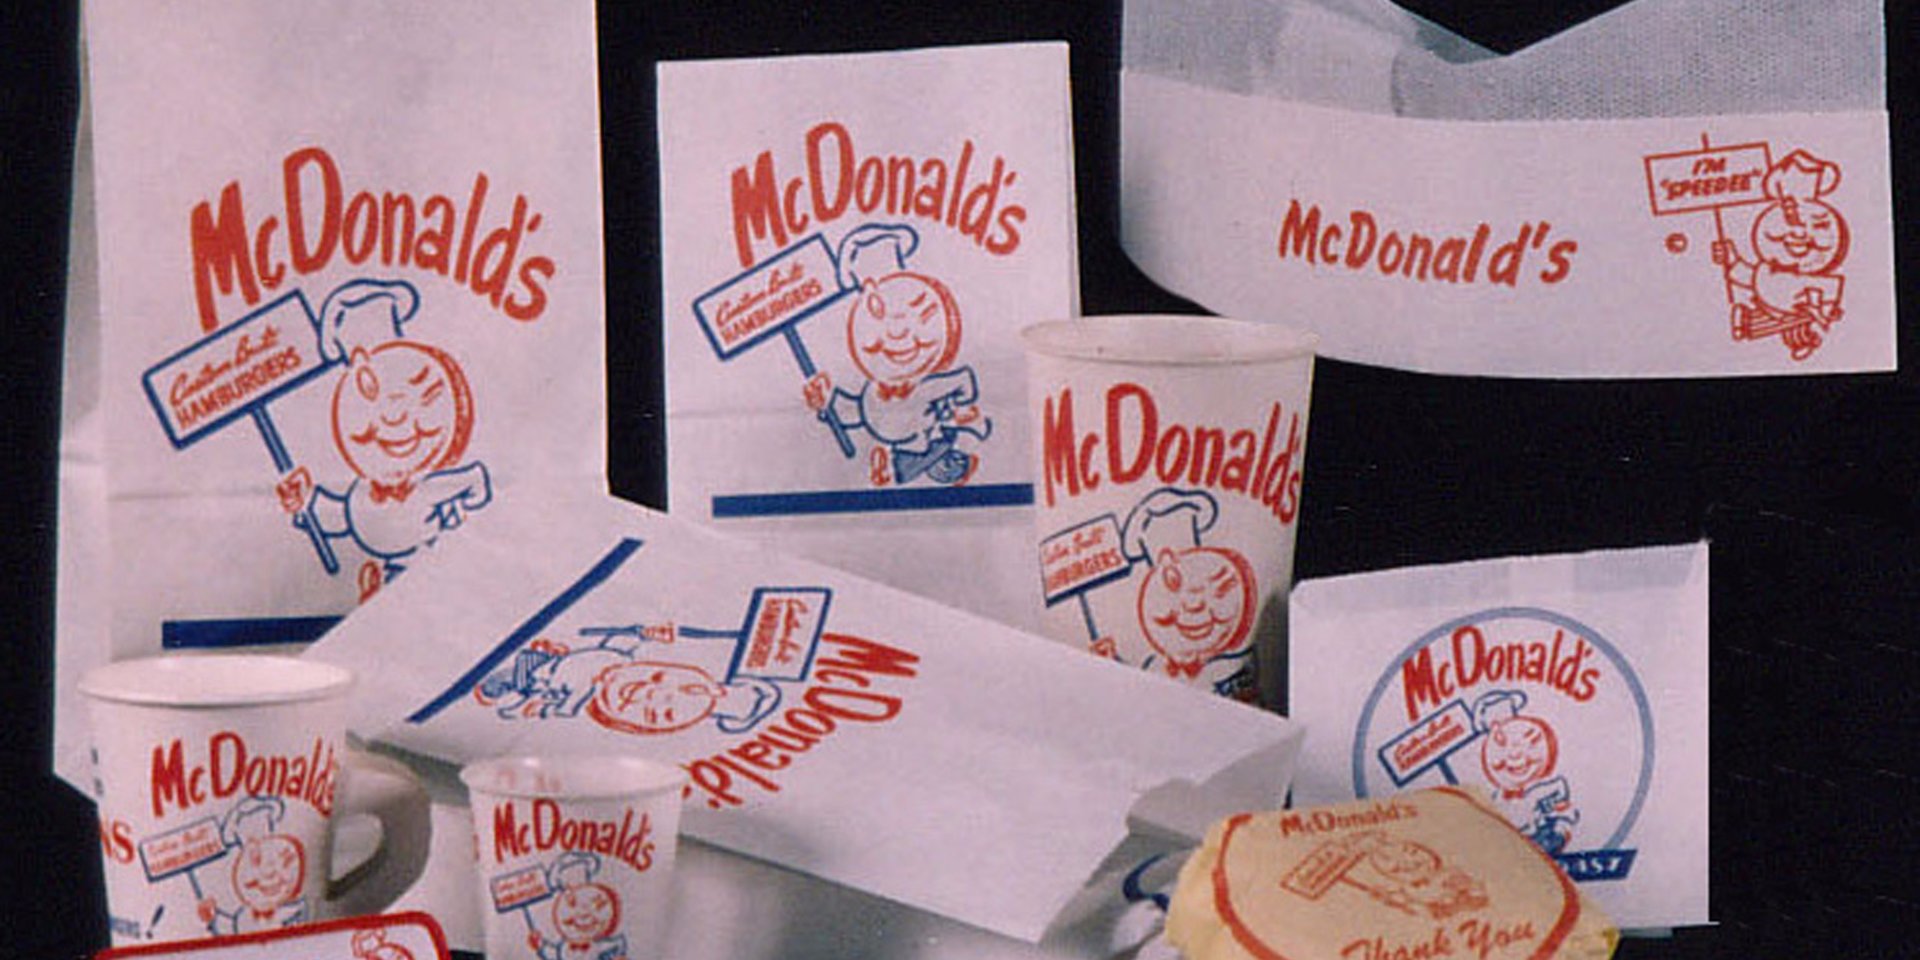 McDonalds packaging back then looked much better than today